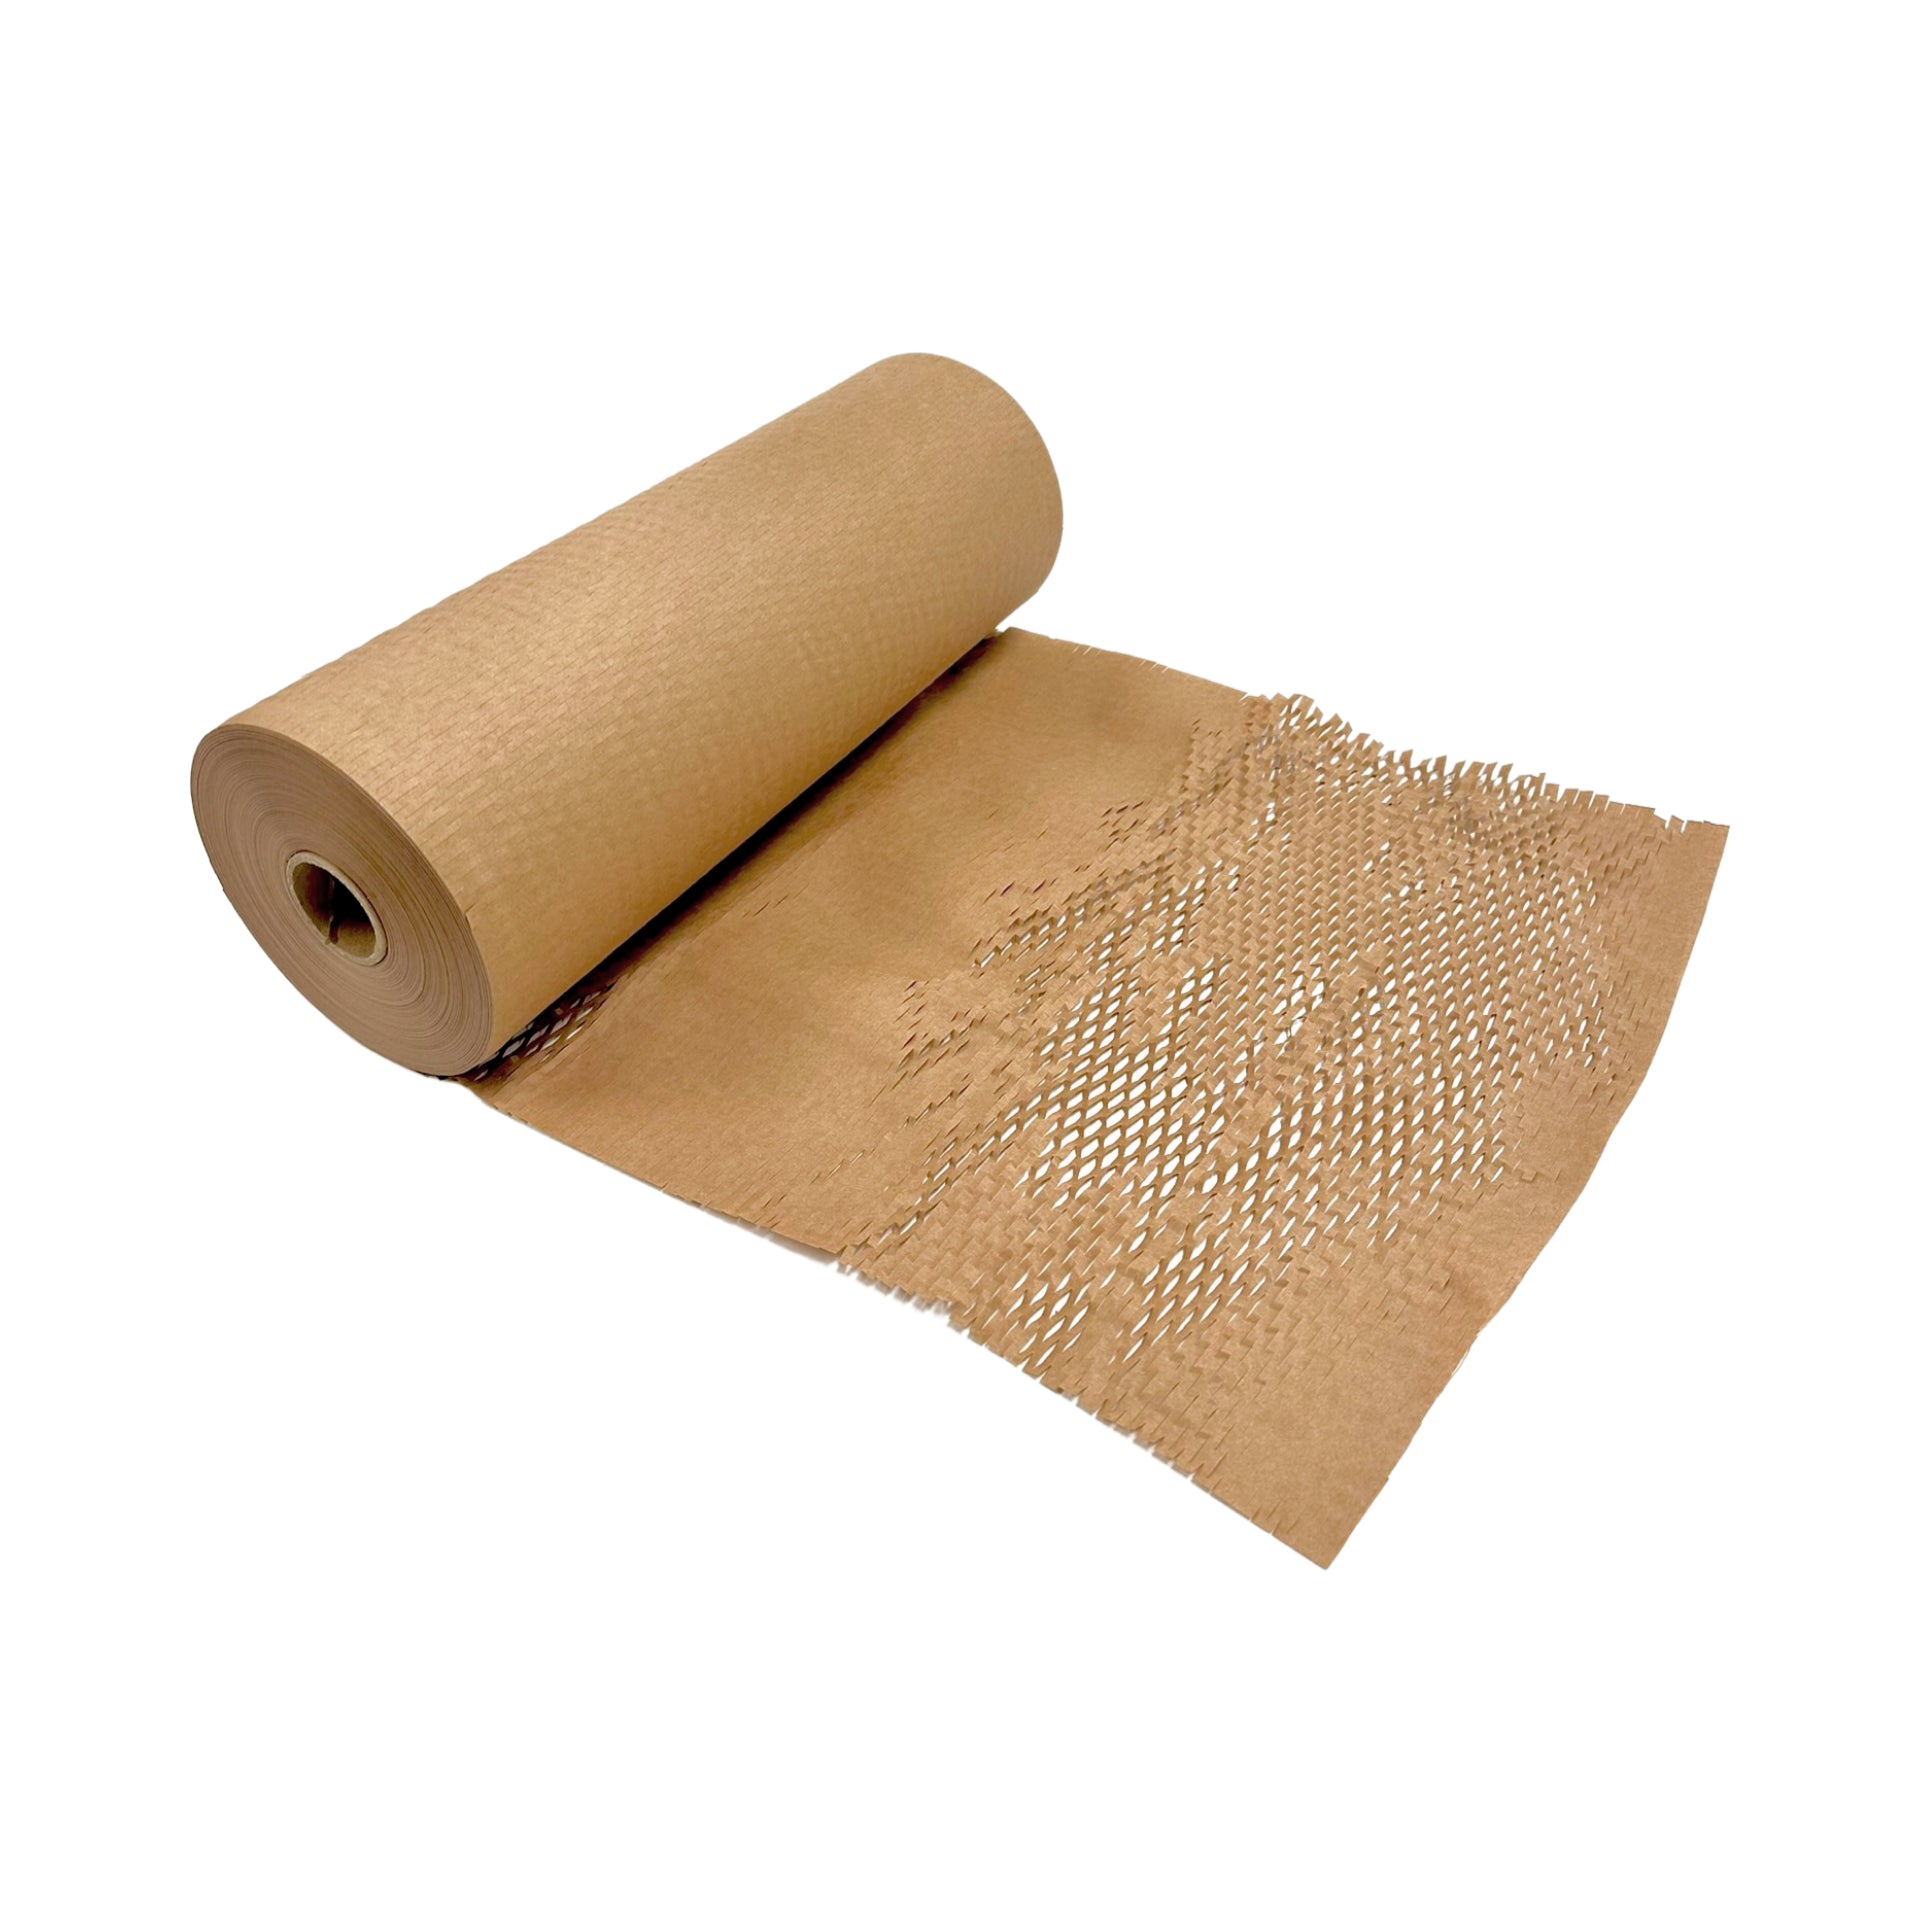 1pcs, Honeycomb, 15x4800 inches, Wrapping Paper Roll